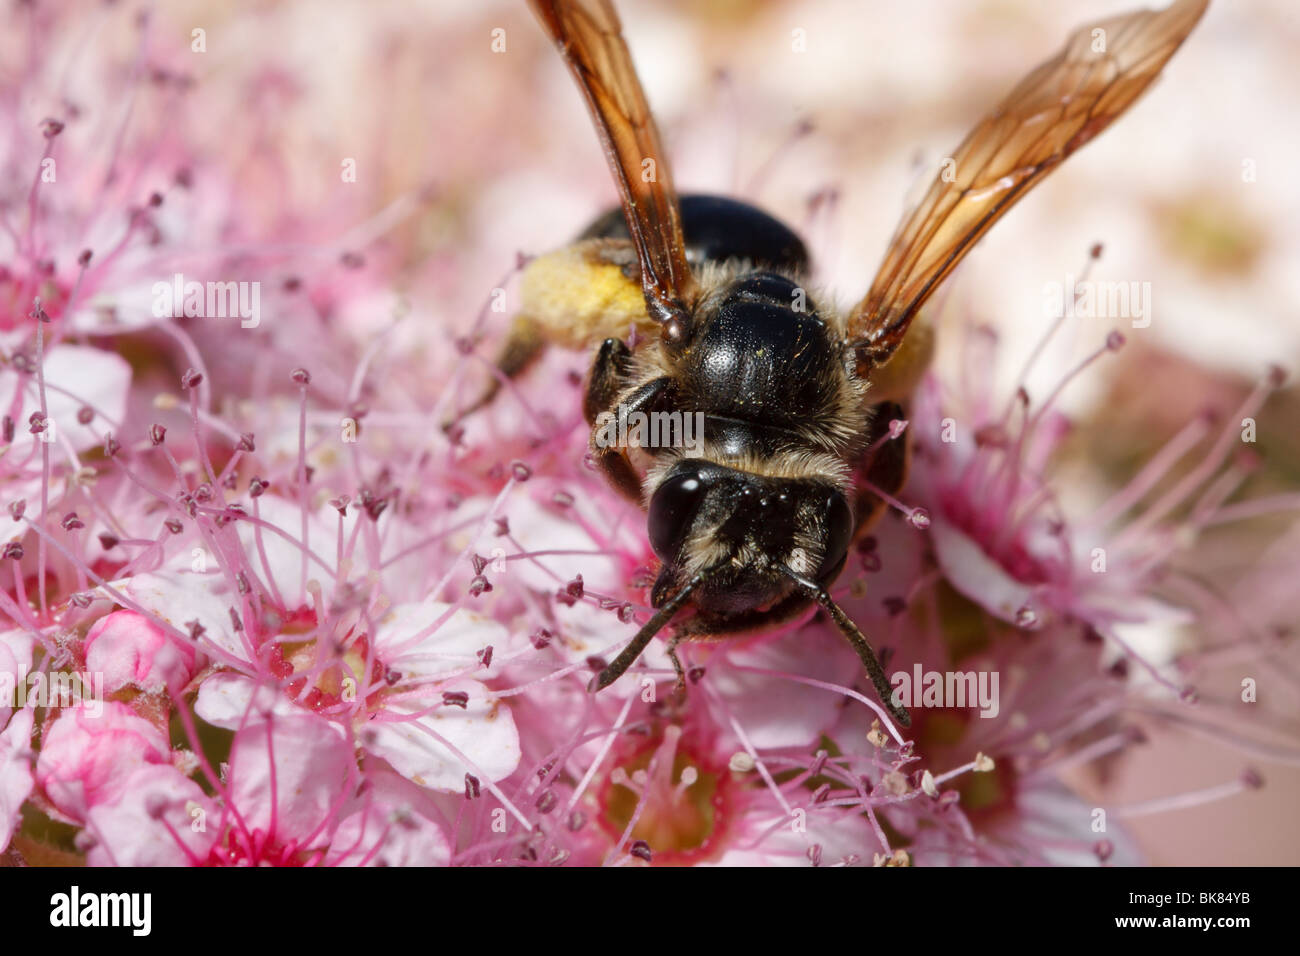 A miner bee gathers pollen to stock her burrow. Stock Photo